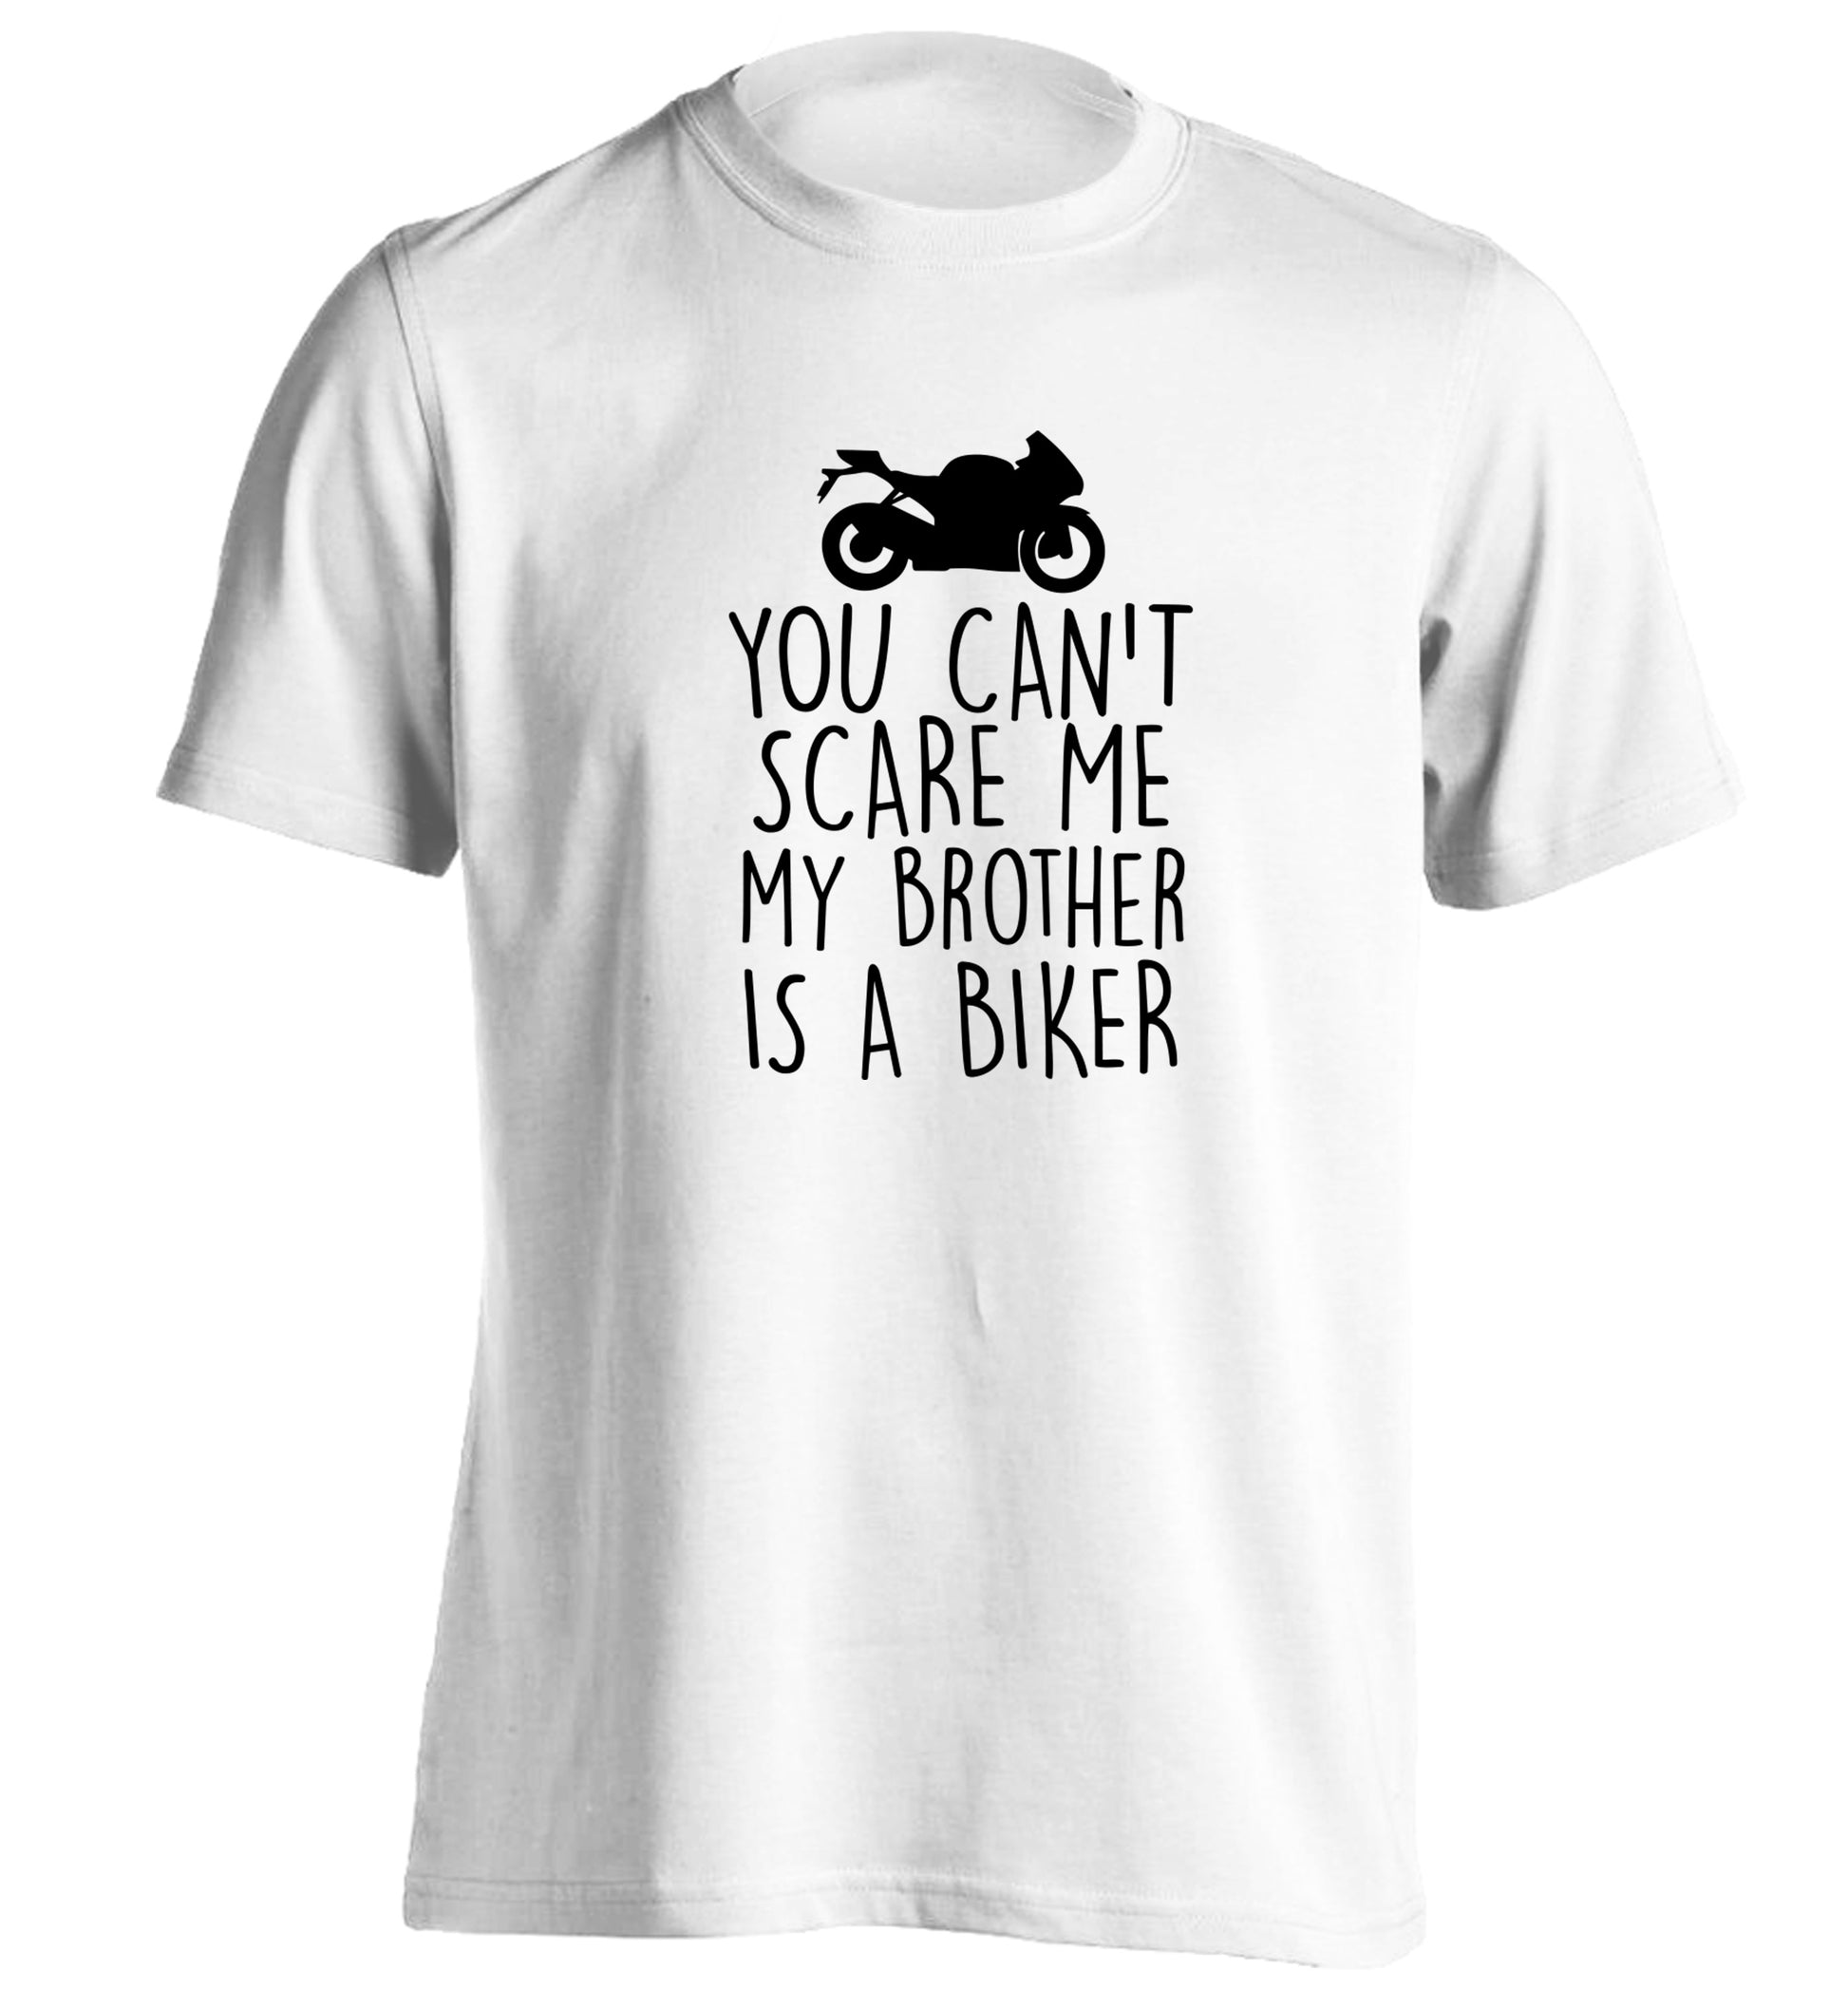 You can't scare me my brother is a biker adults unisex white Tshirt 2XL